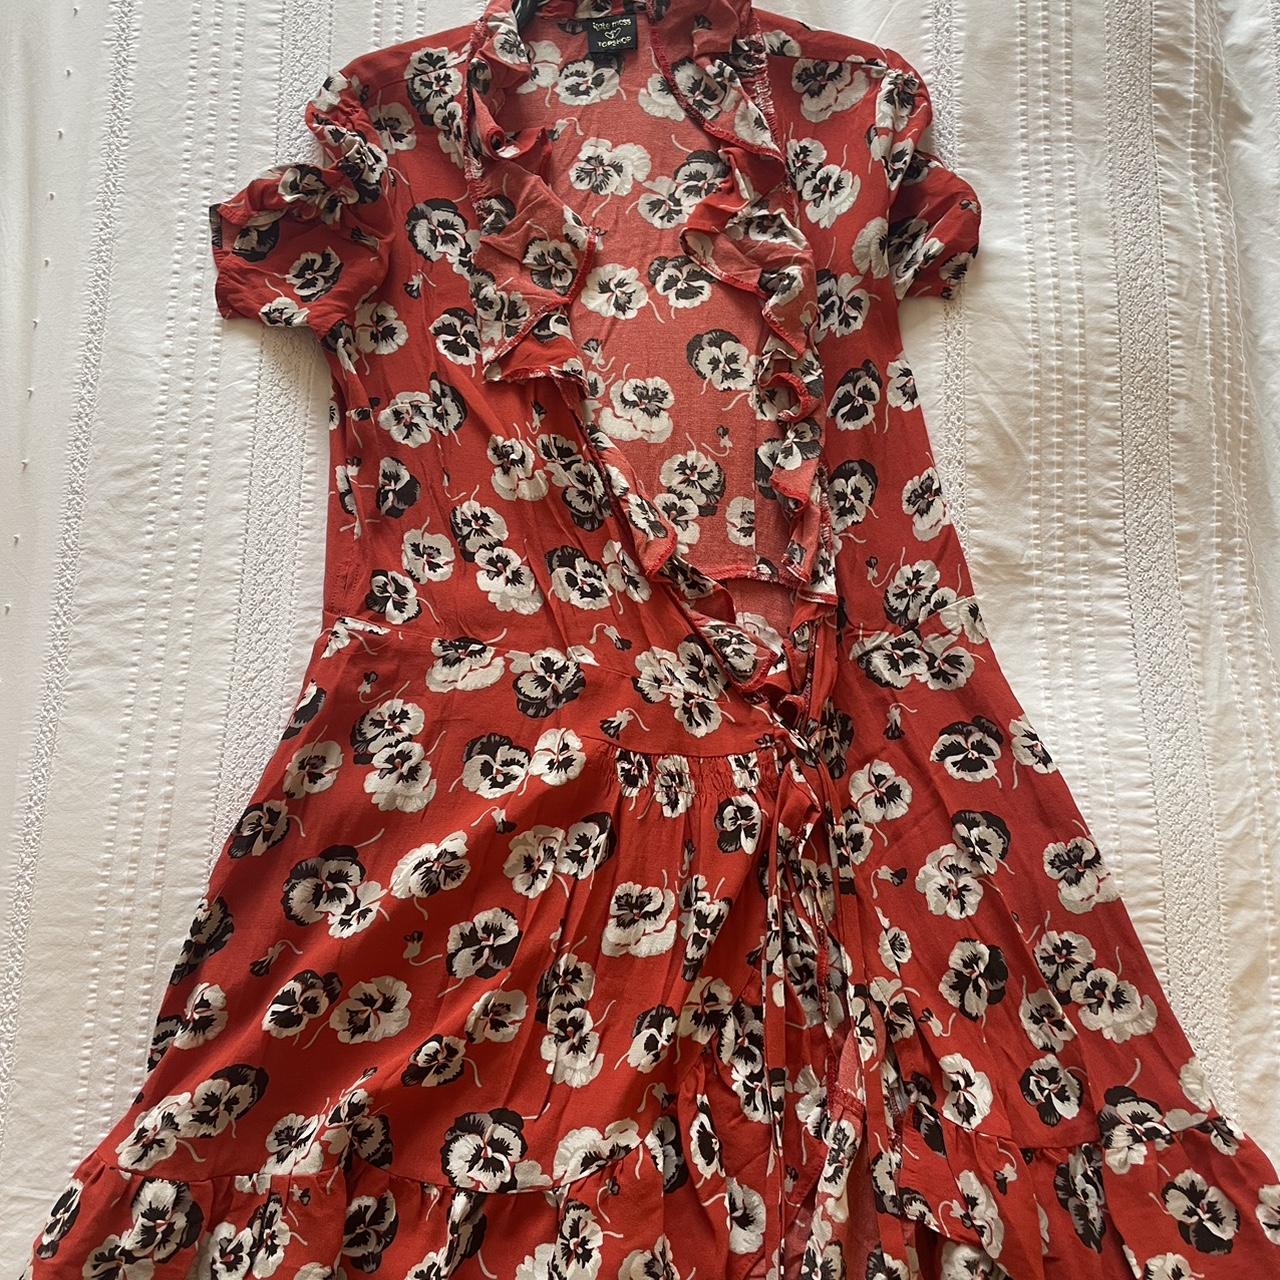 Iconic and Rare Kate Moss Topshop Poppy Wrap Mini... - Depop